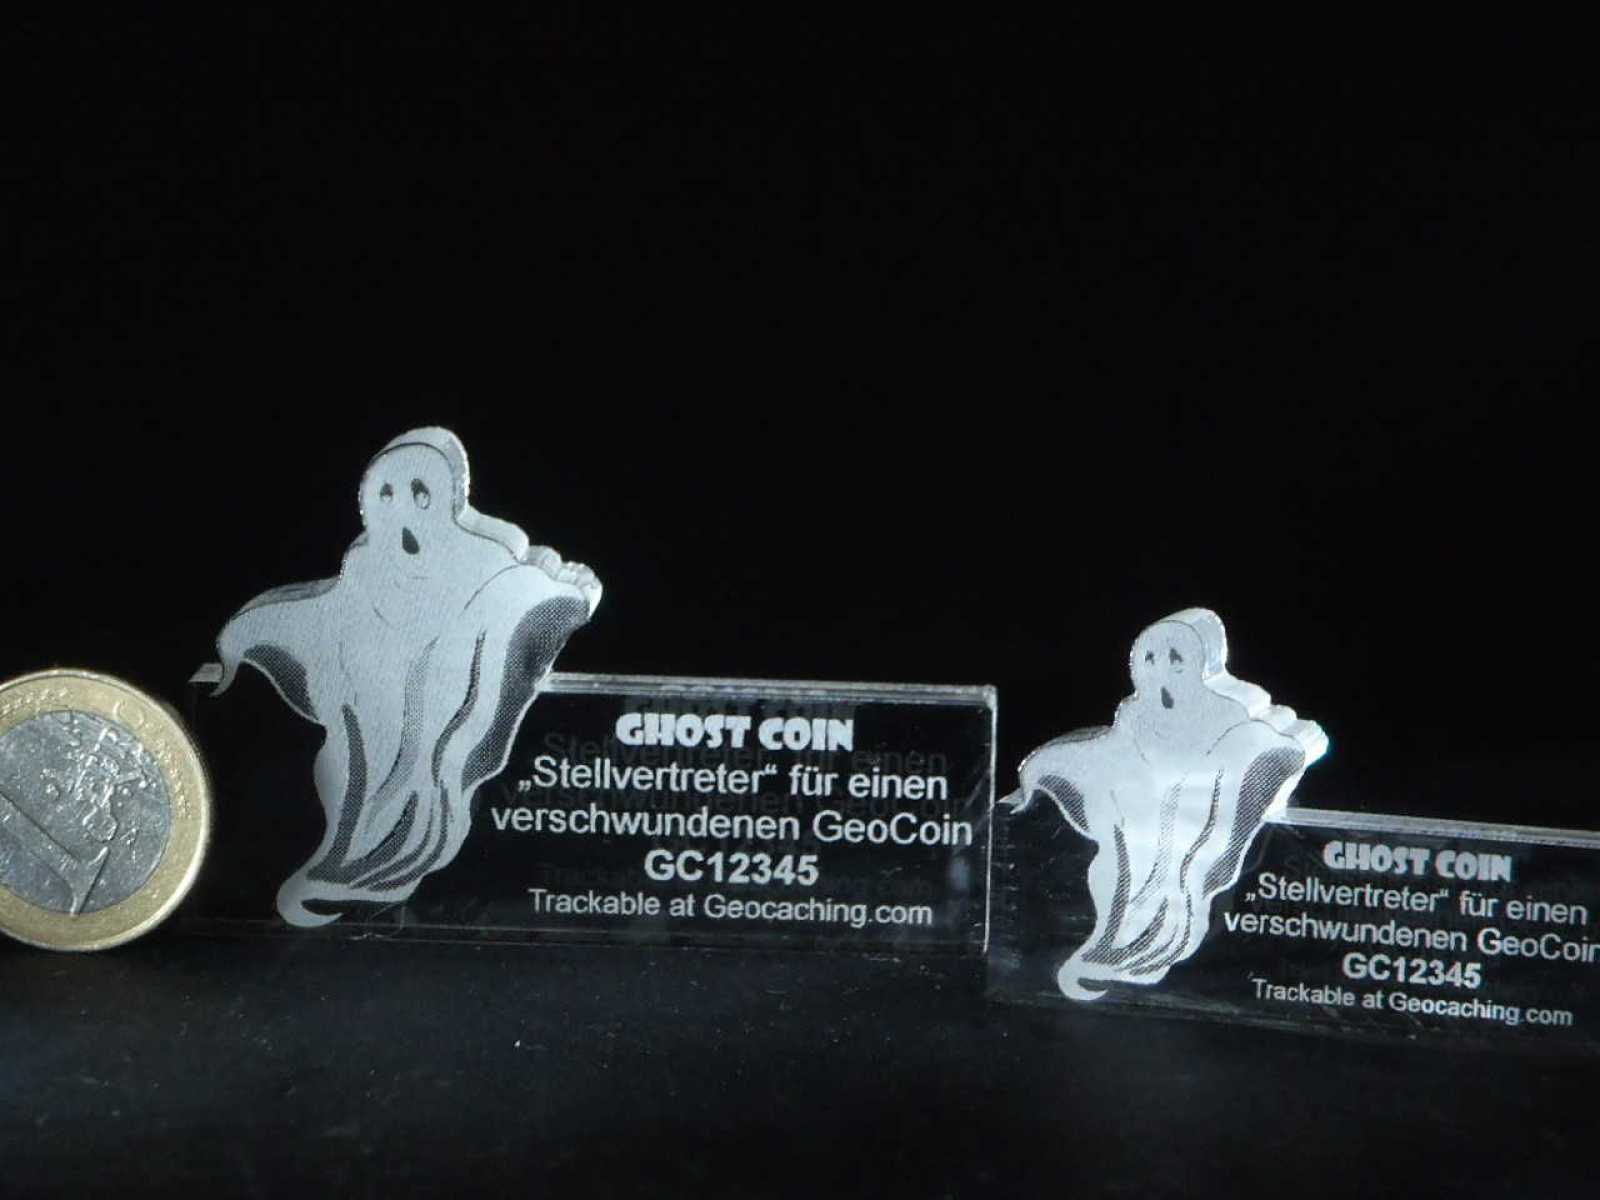 Lost Geocoin "The Ghost Coin #1"